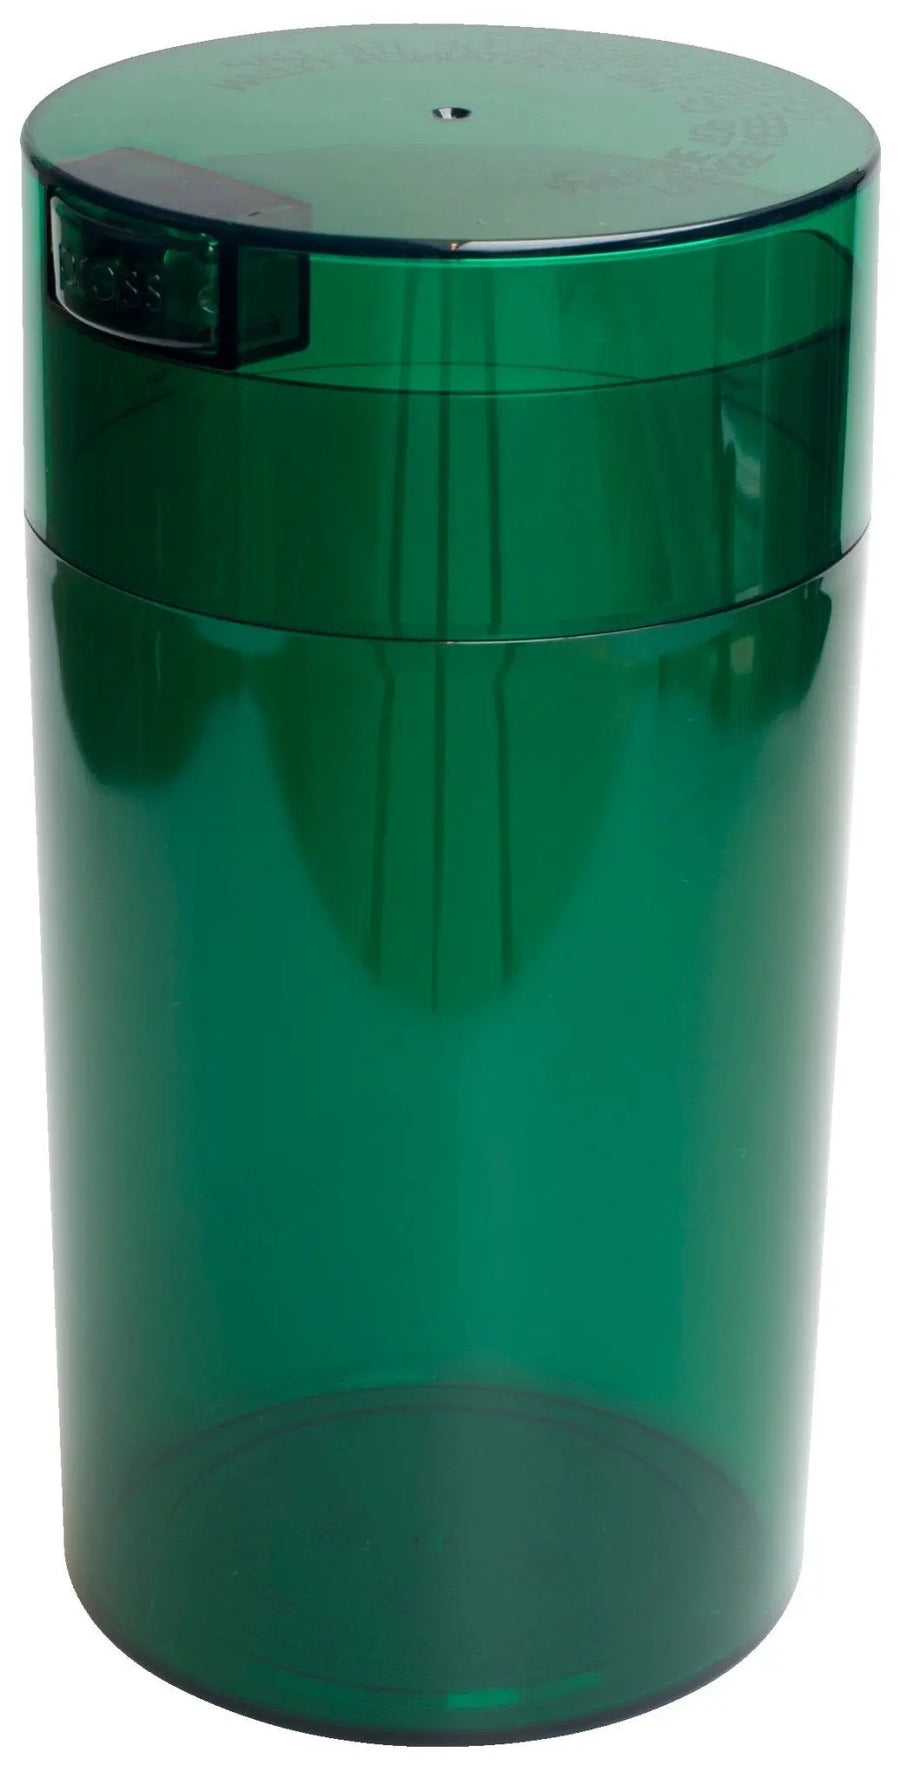 Tightvac 1.3 liter / 340g / Clear / Green Tint - TightVac Europe - The eassiest storage solutions